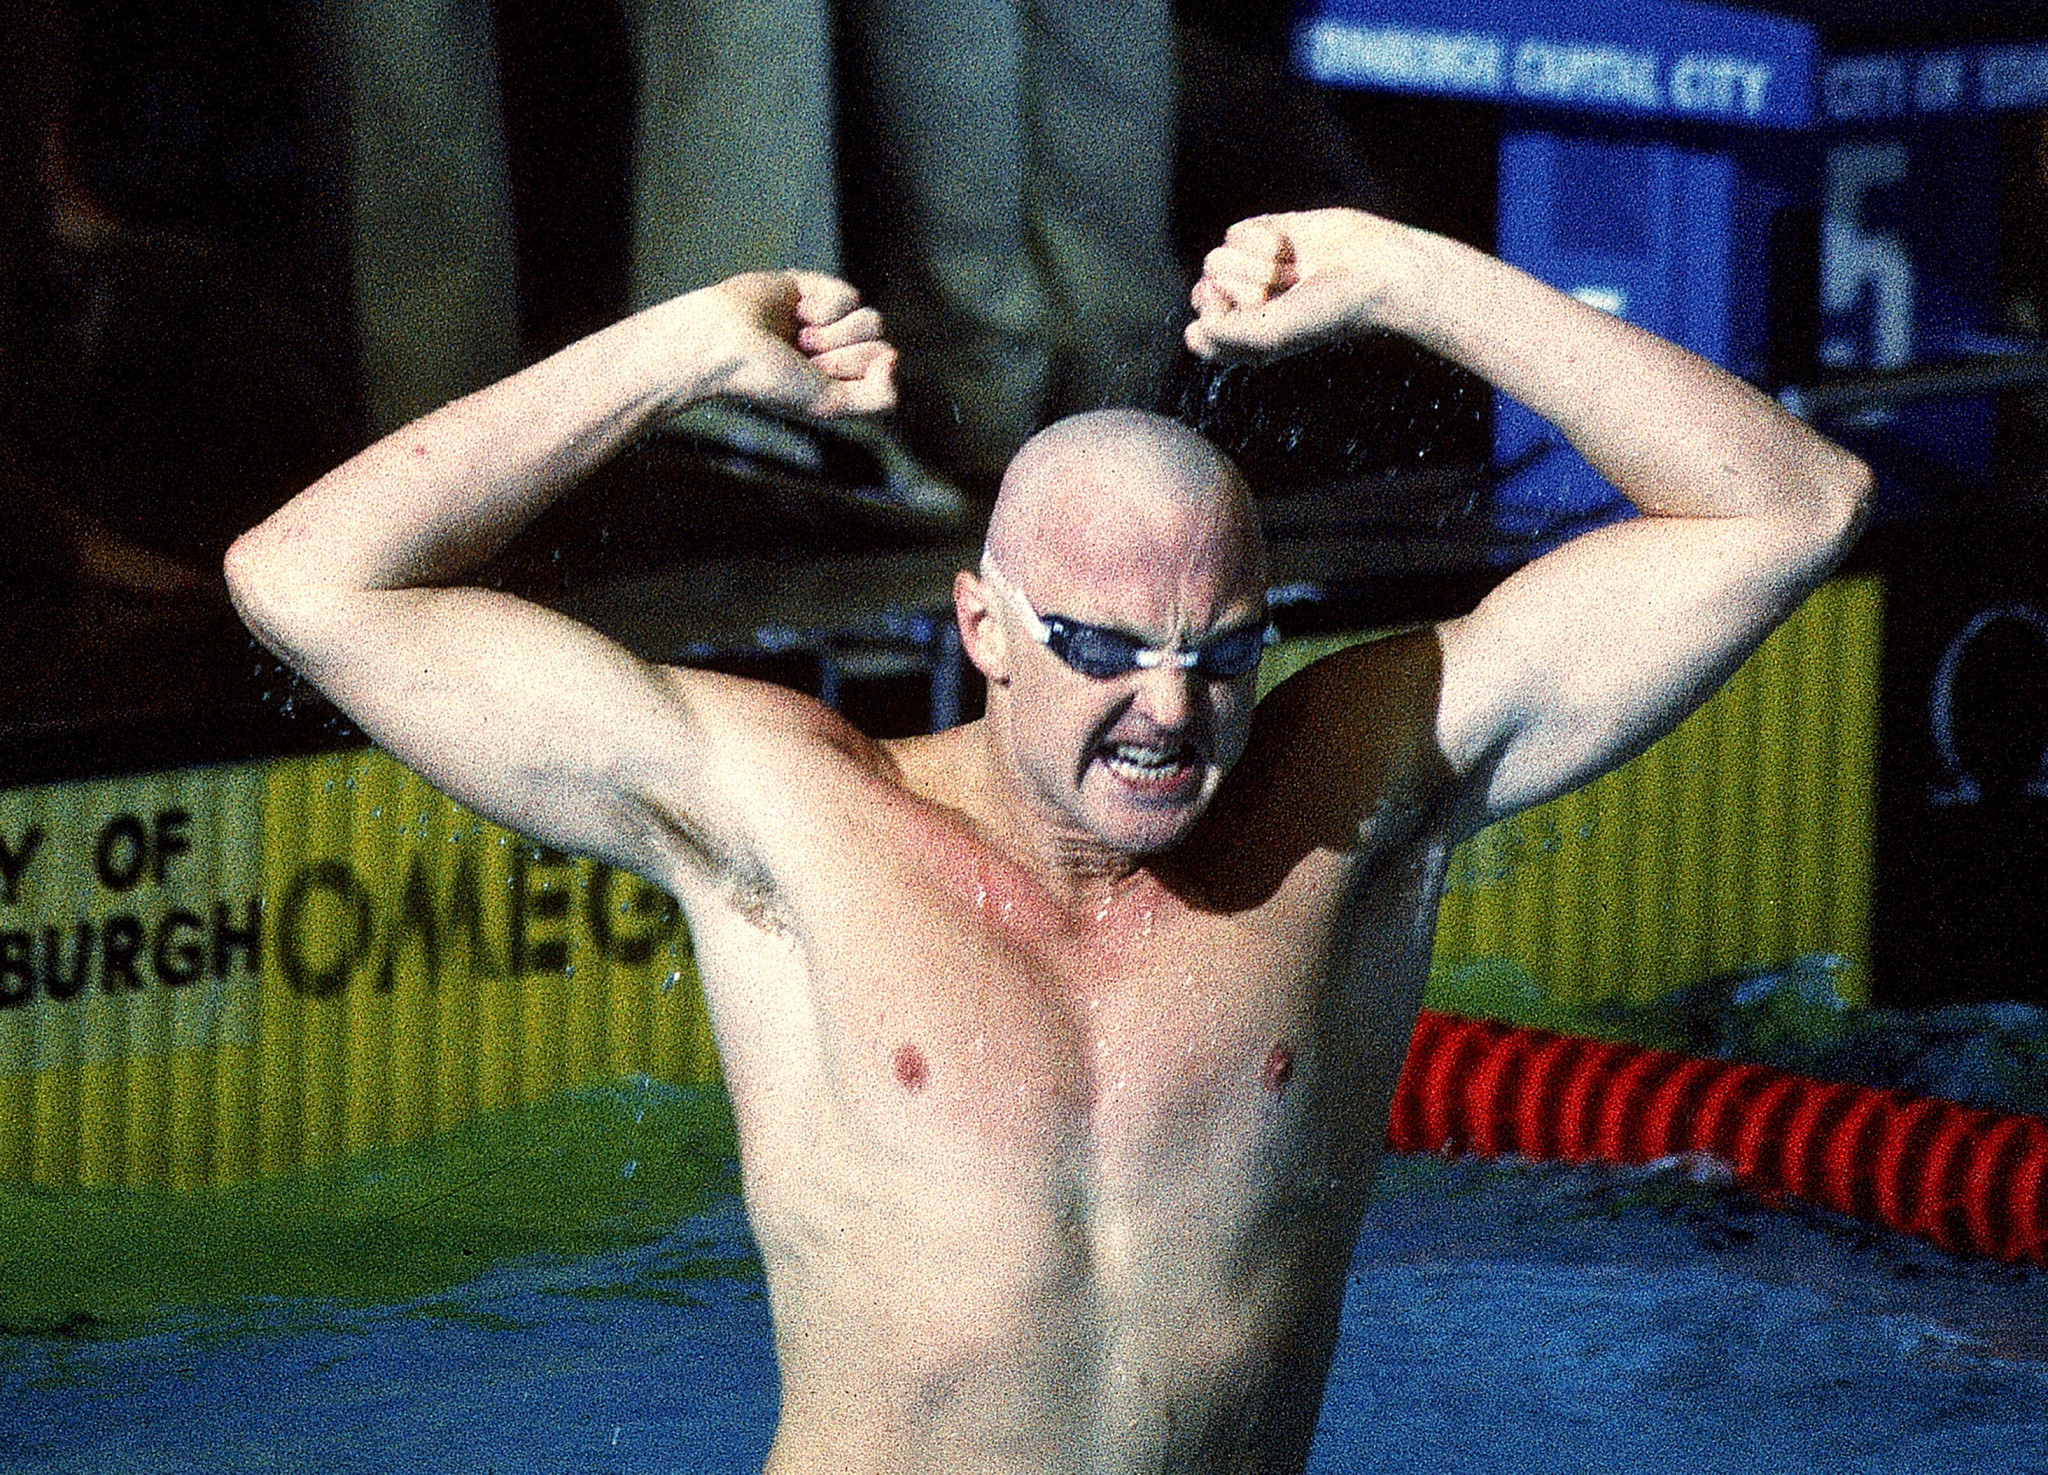 Neil Brooks won medals at the Olympic and Commonwealth Games during his swimming career ©Getty Images